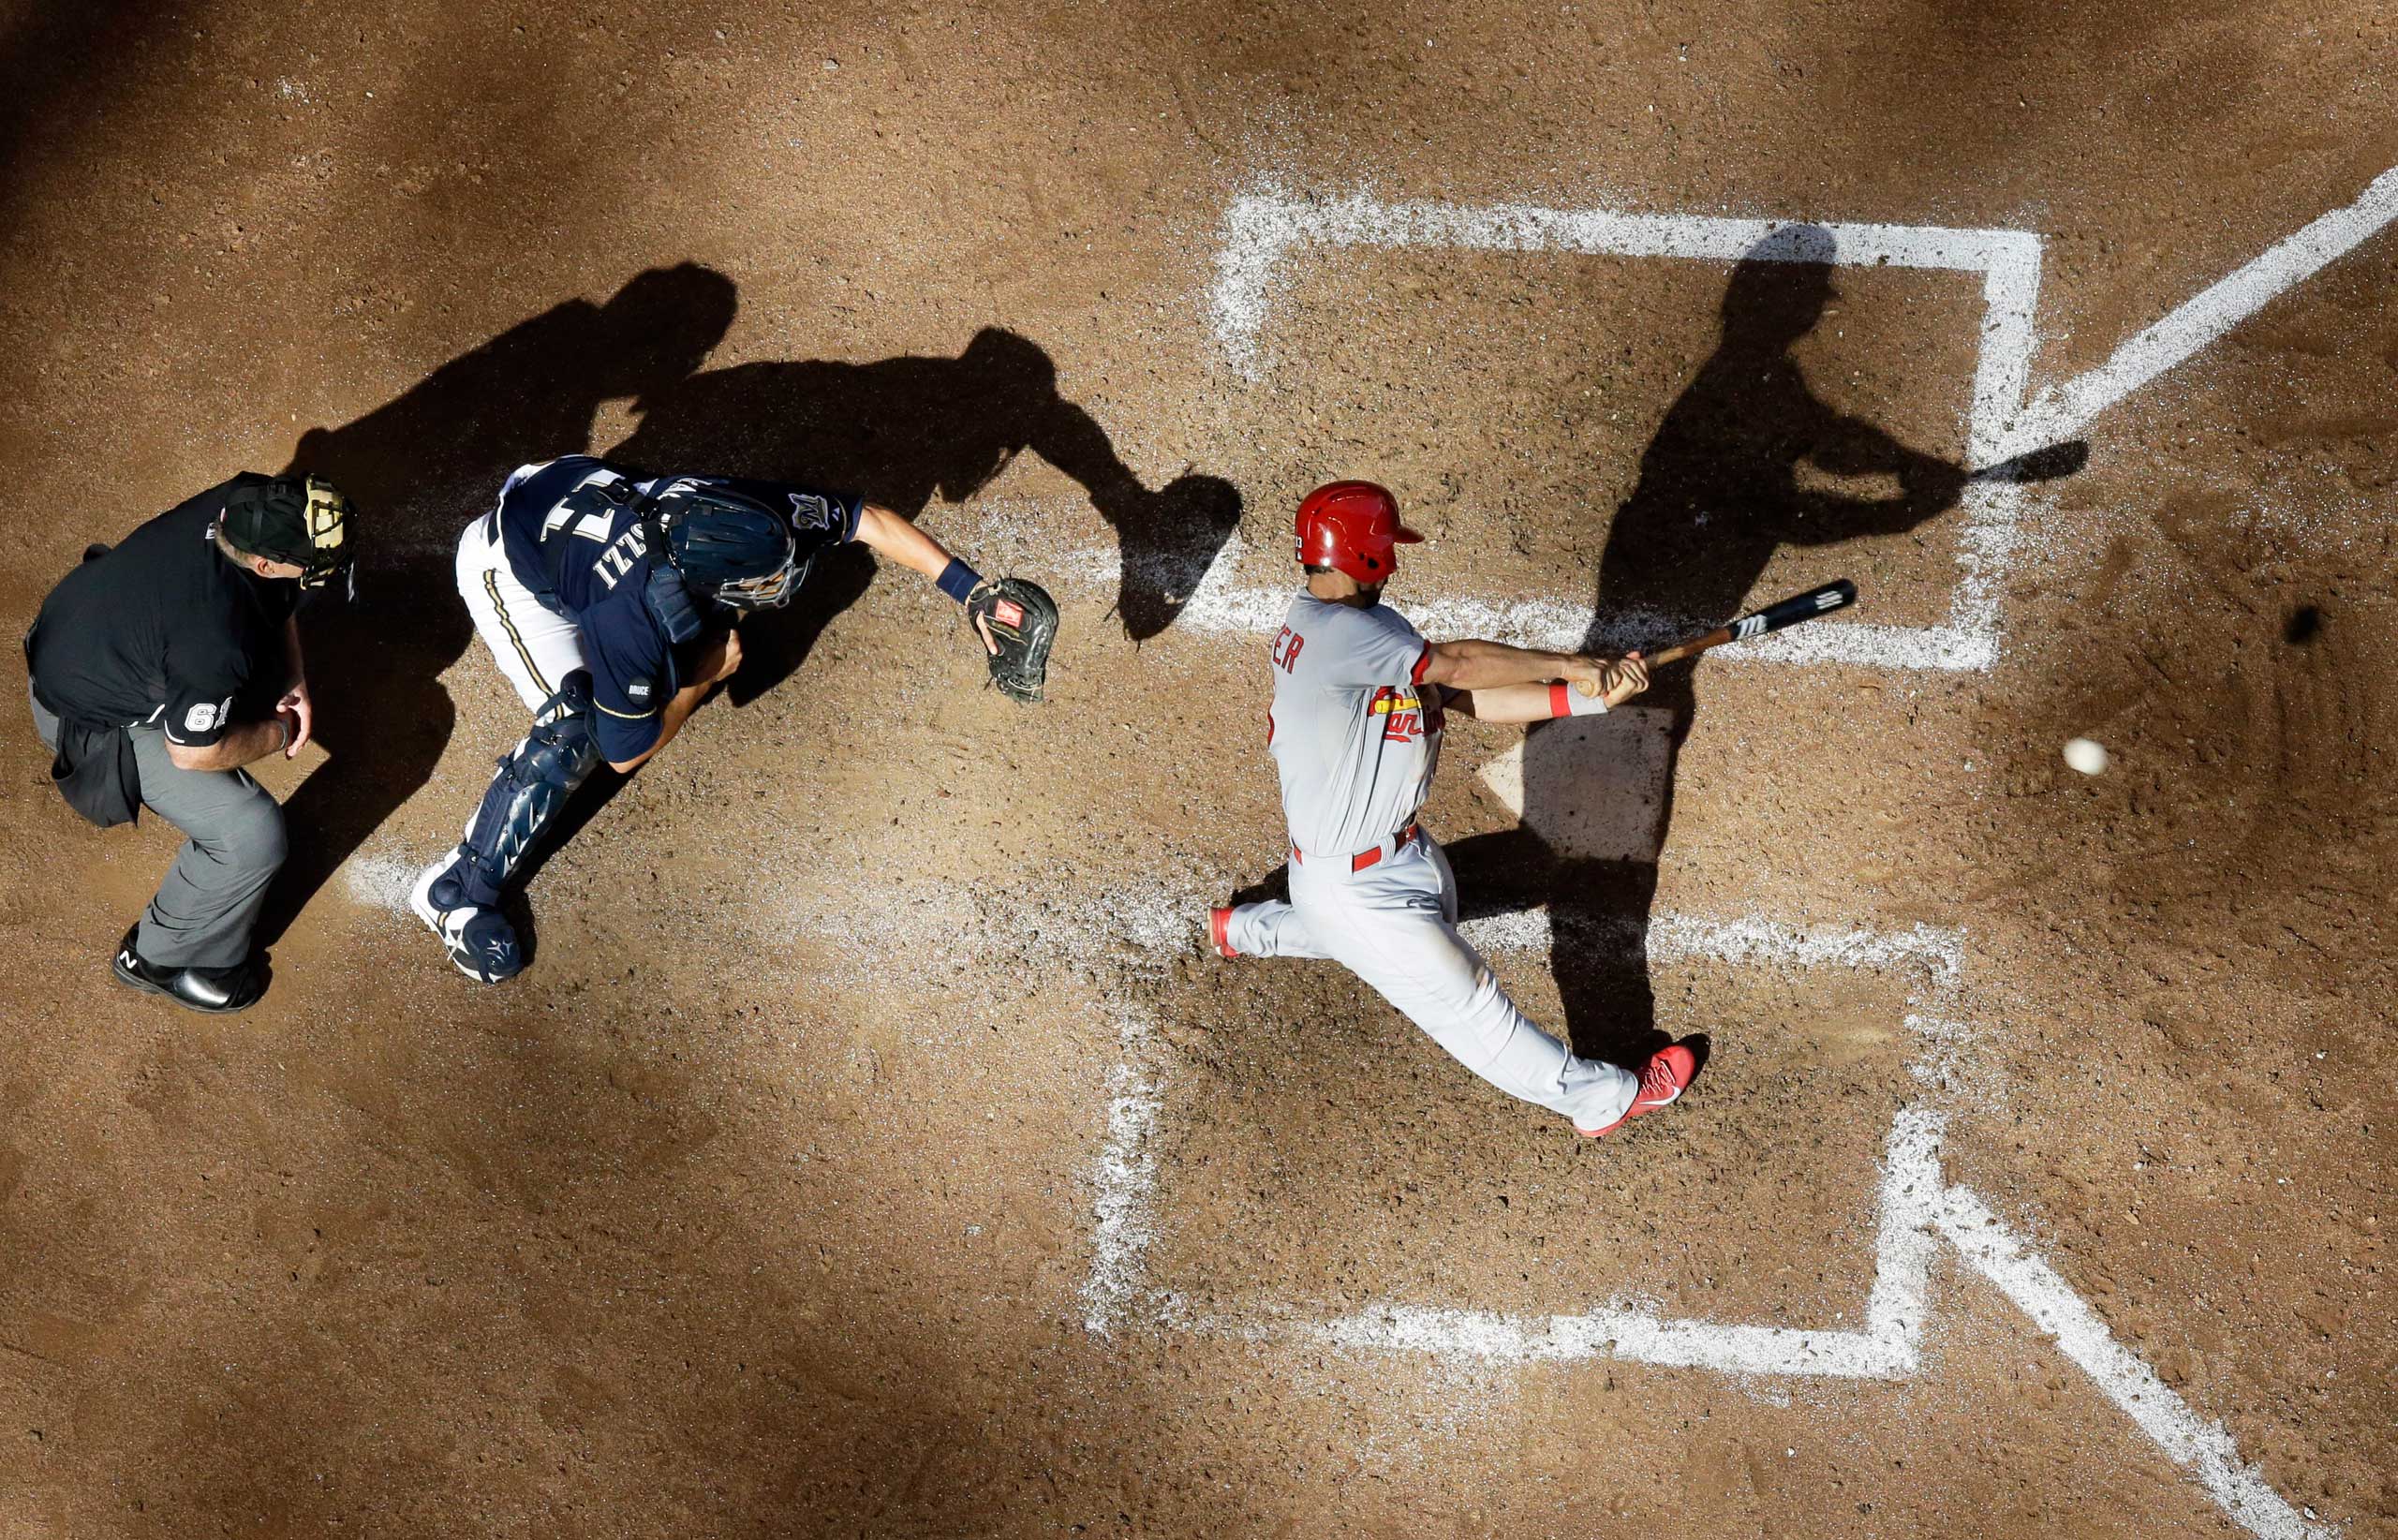 St. Louis Cardinals' Matt Carpenter hits an RBI single during the ninth inning of a baseball game against the Milwaukee Brewers in Milwaukee on Sept. 7, 2014. (Morry Gash—AP)